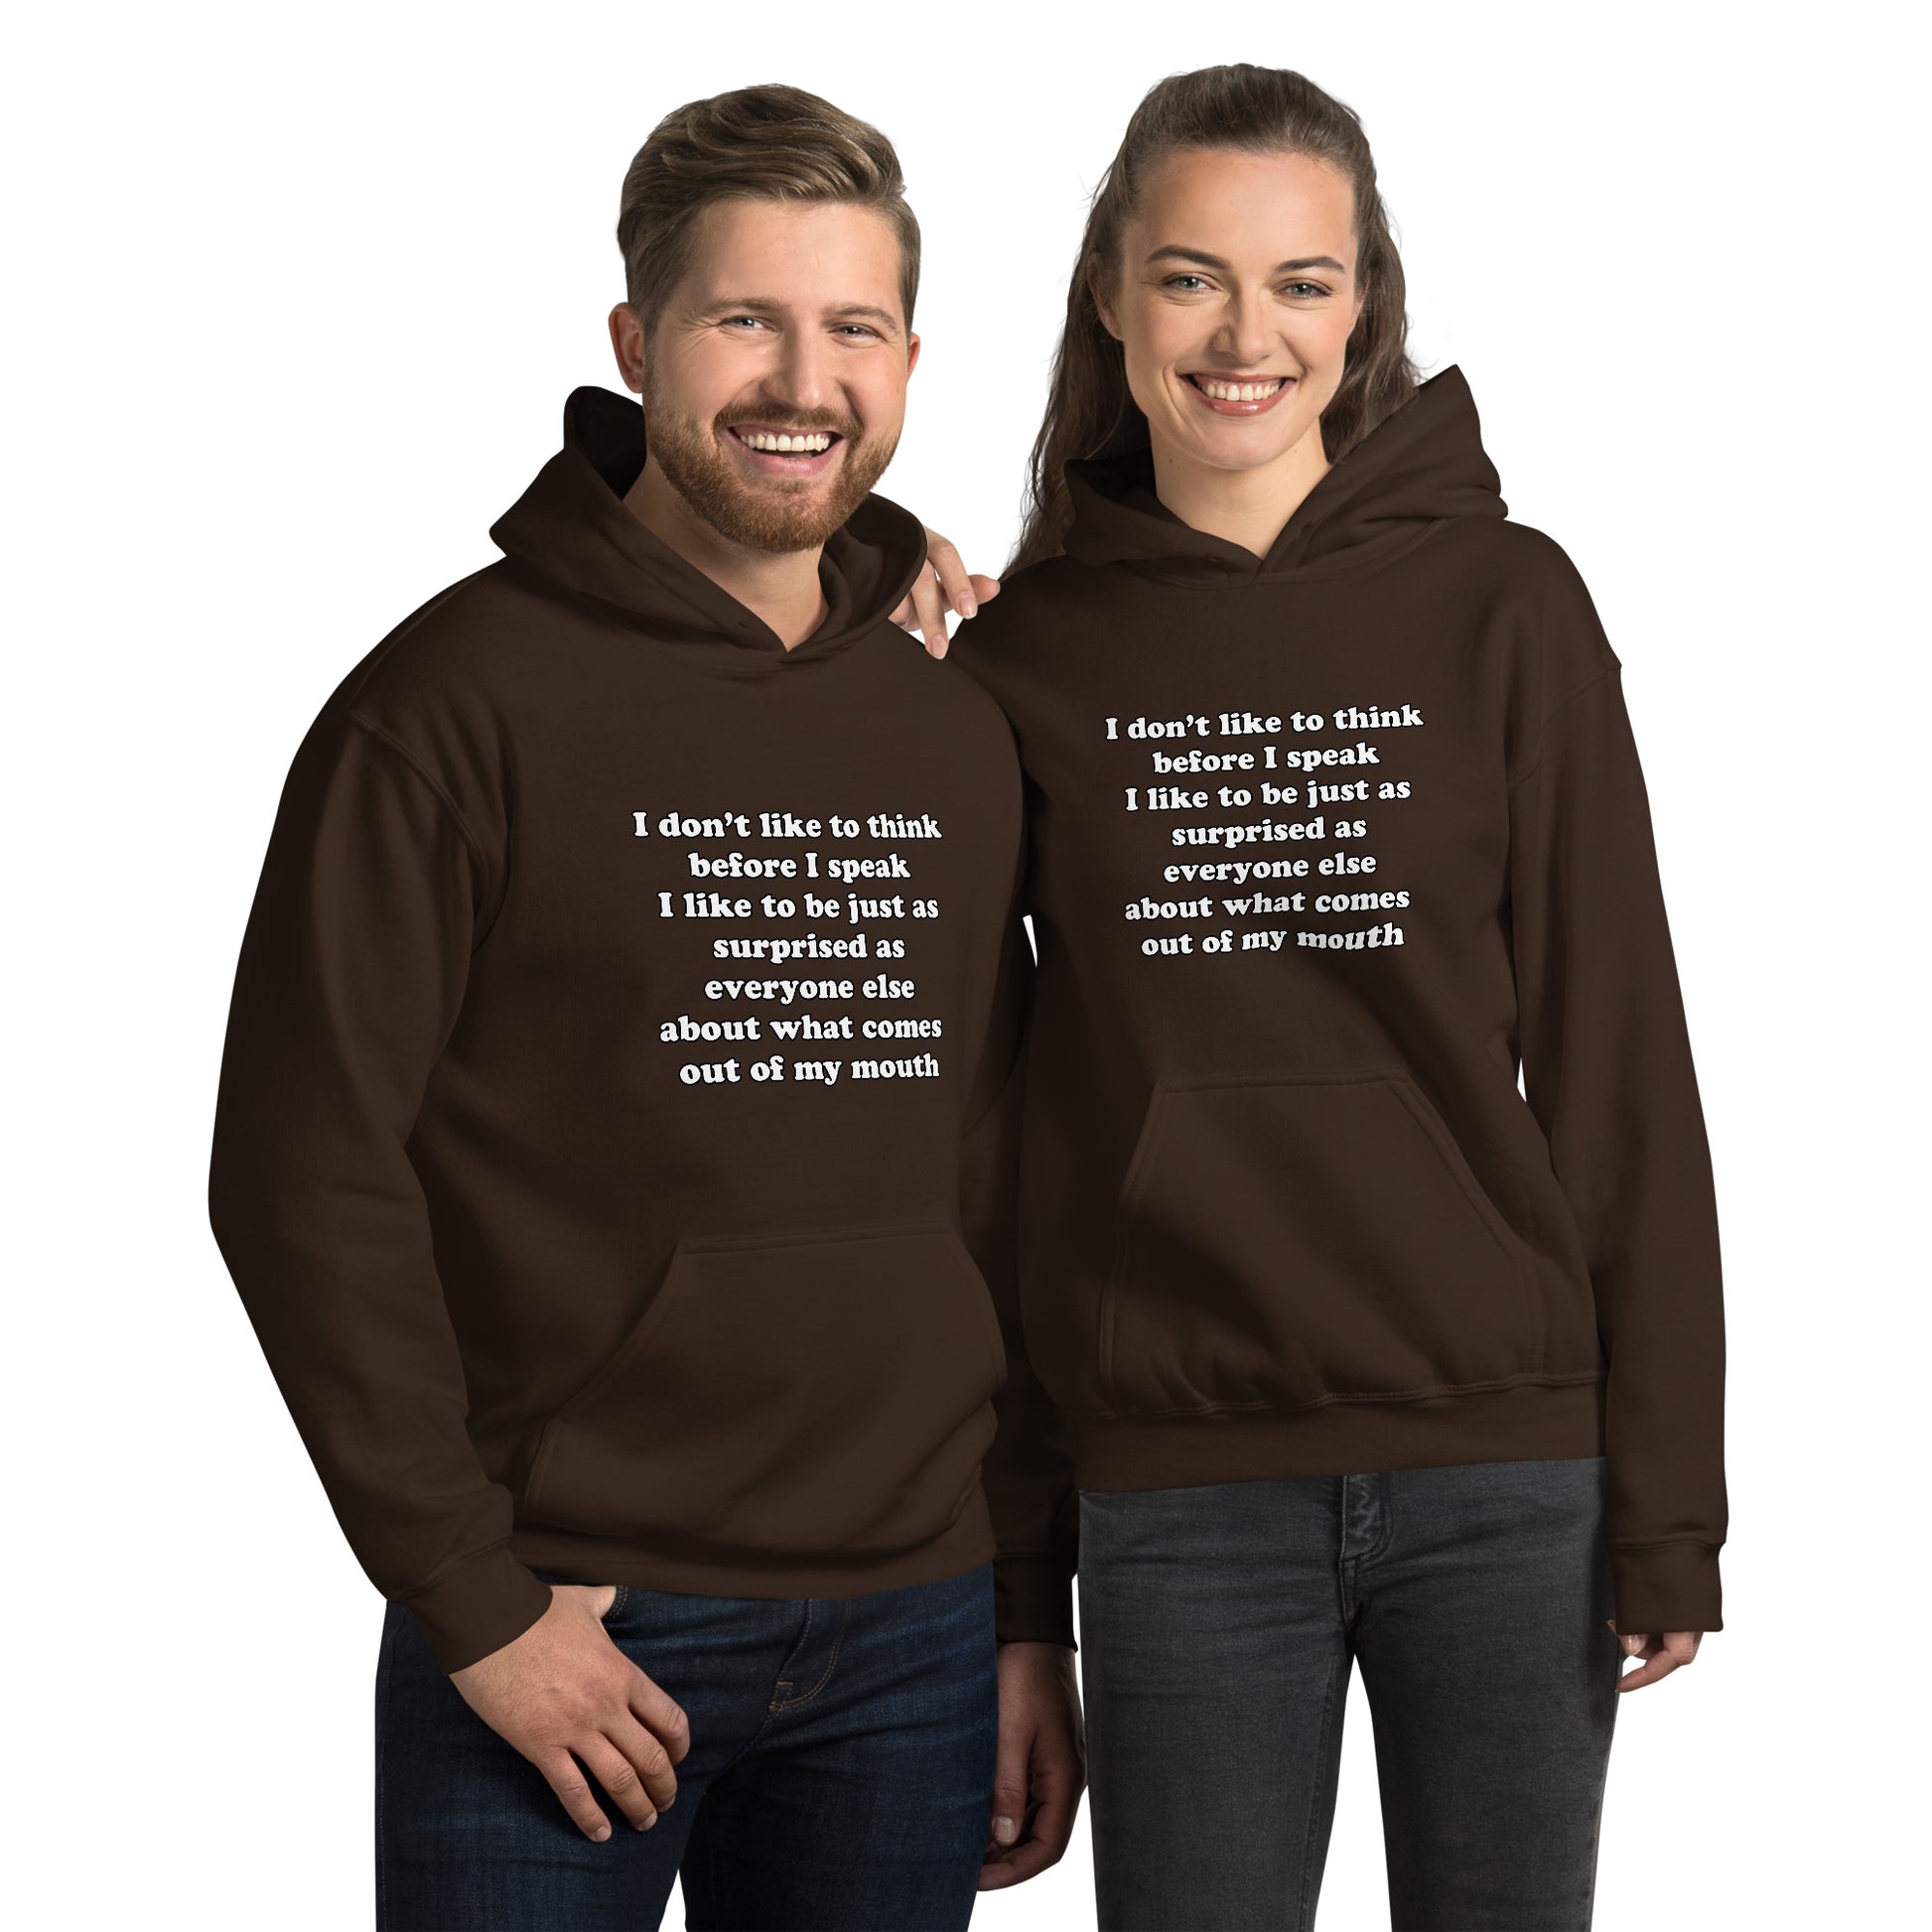 Man and woman with dark chocolate brown hoodie with text “I don't think before I speak Just as serprised as everyone about what comes out of my mouth"